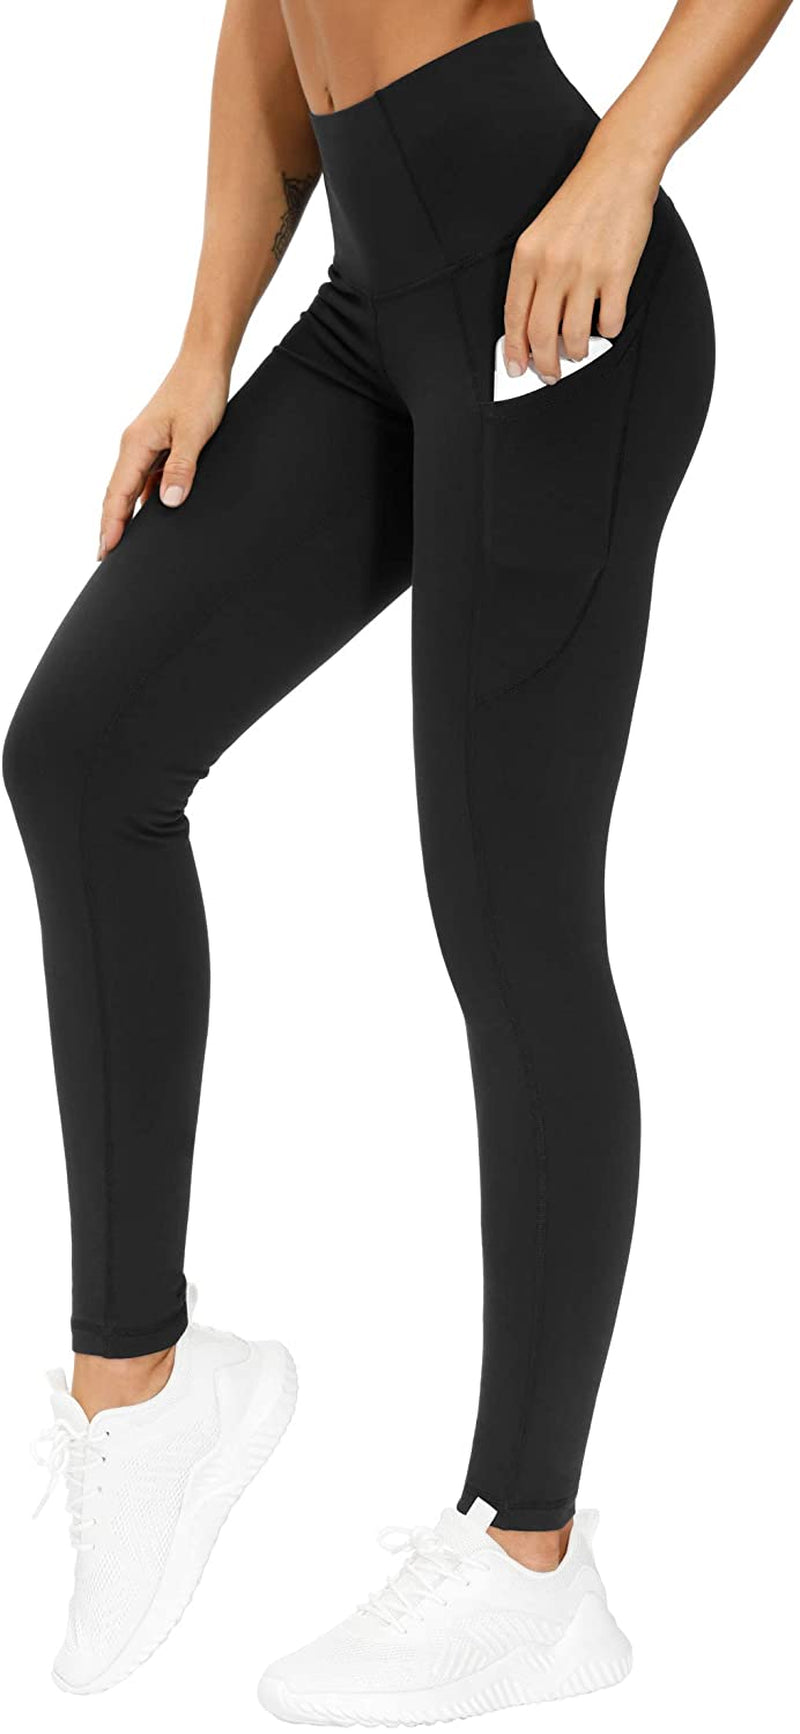 Thick High Waist Yoga Pants with Pockets - Tummy Control, Black, Large